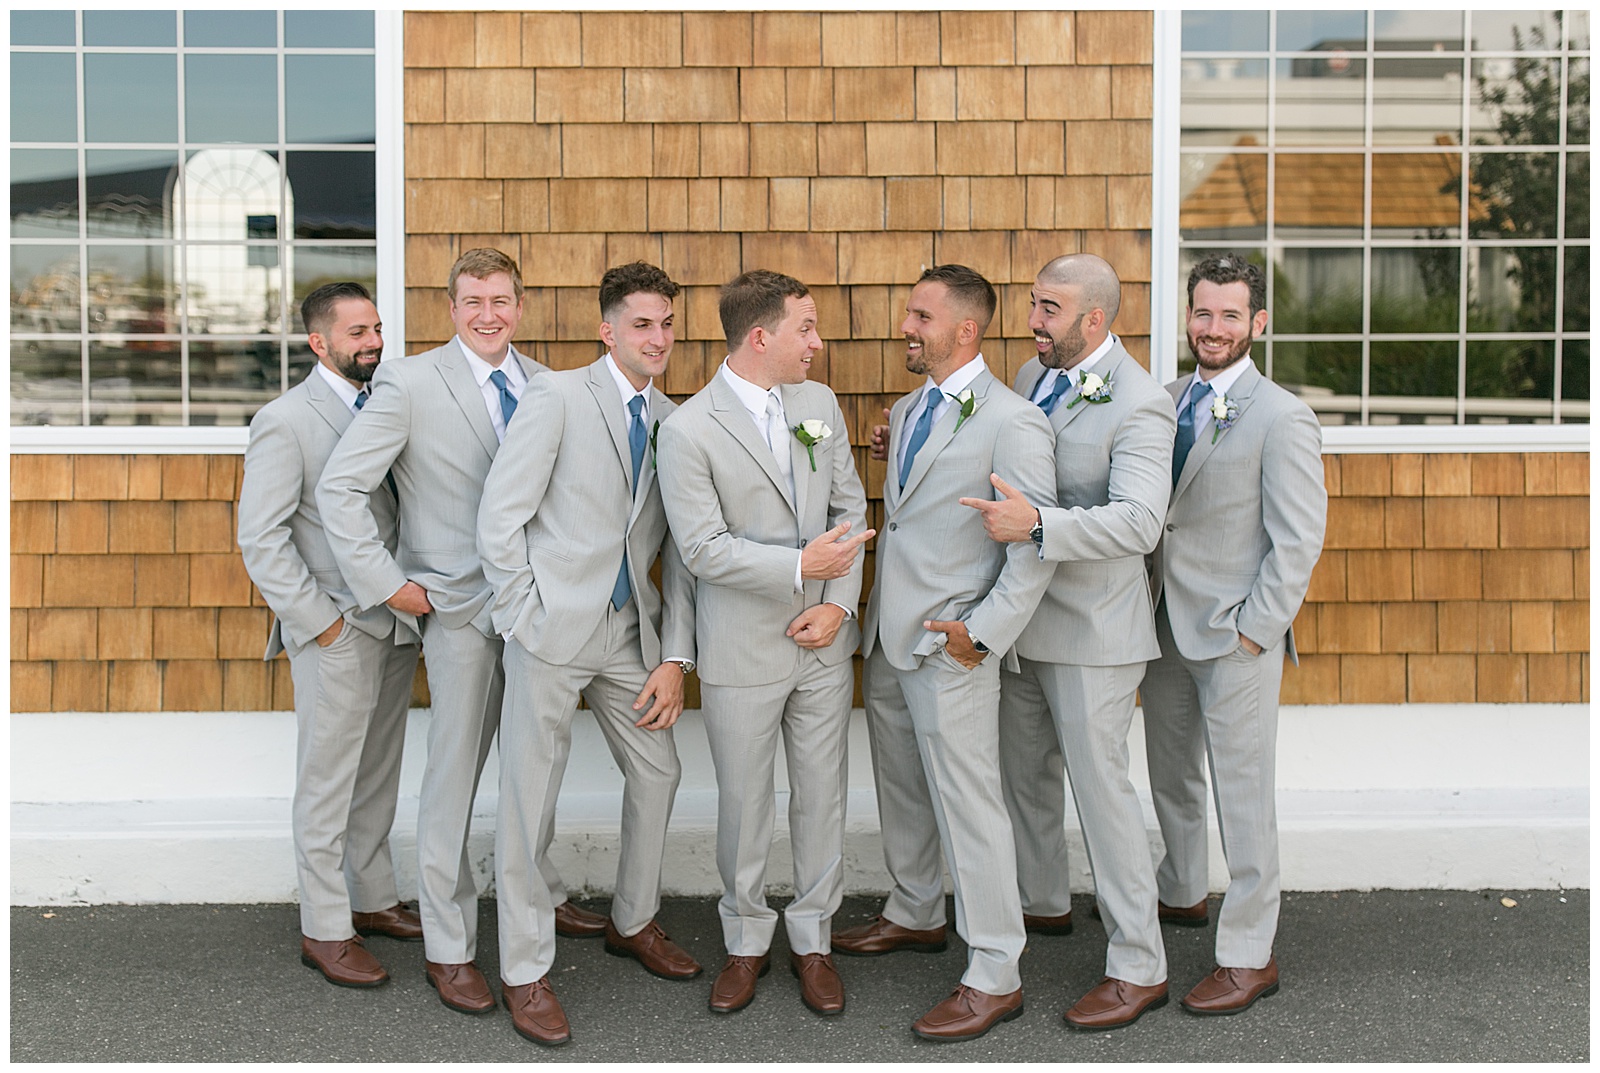 groom and his groomsmen all looking at each other and smiling outside tan building with cedar shake shingles in bay shore, new york